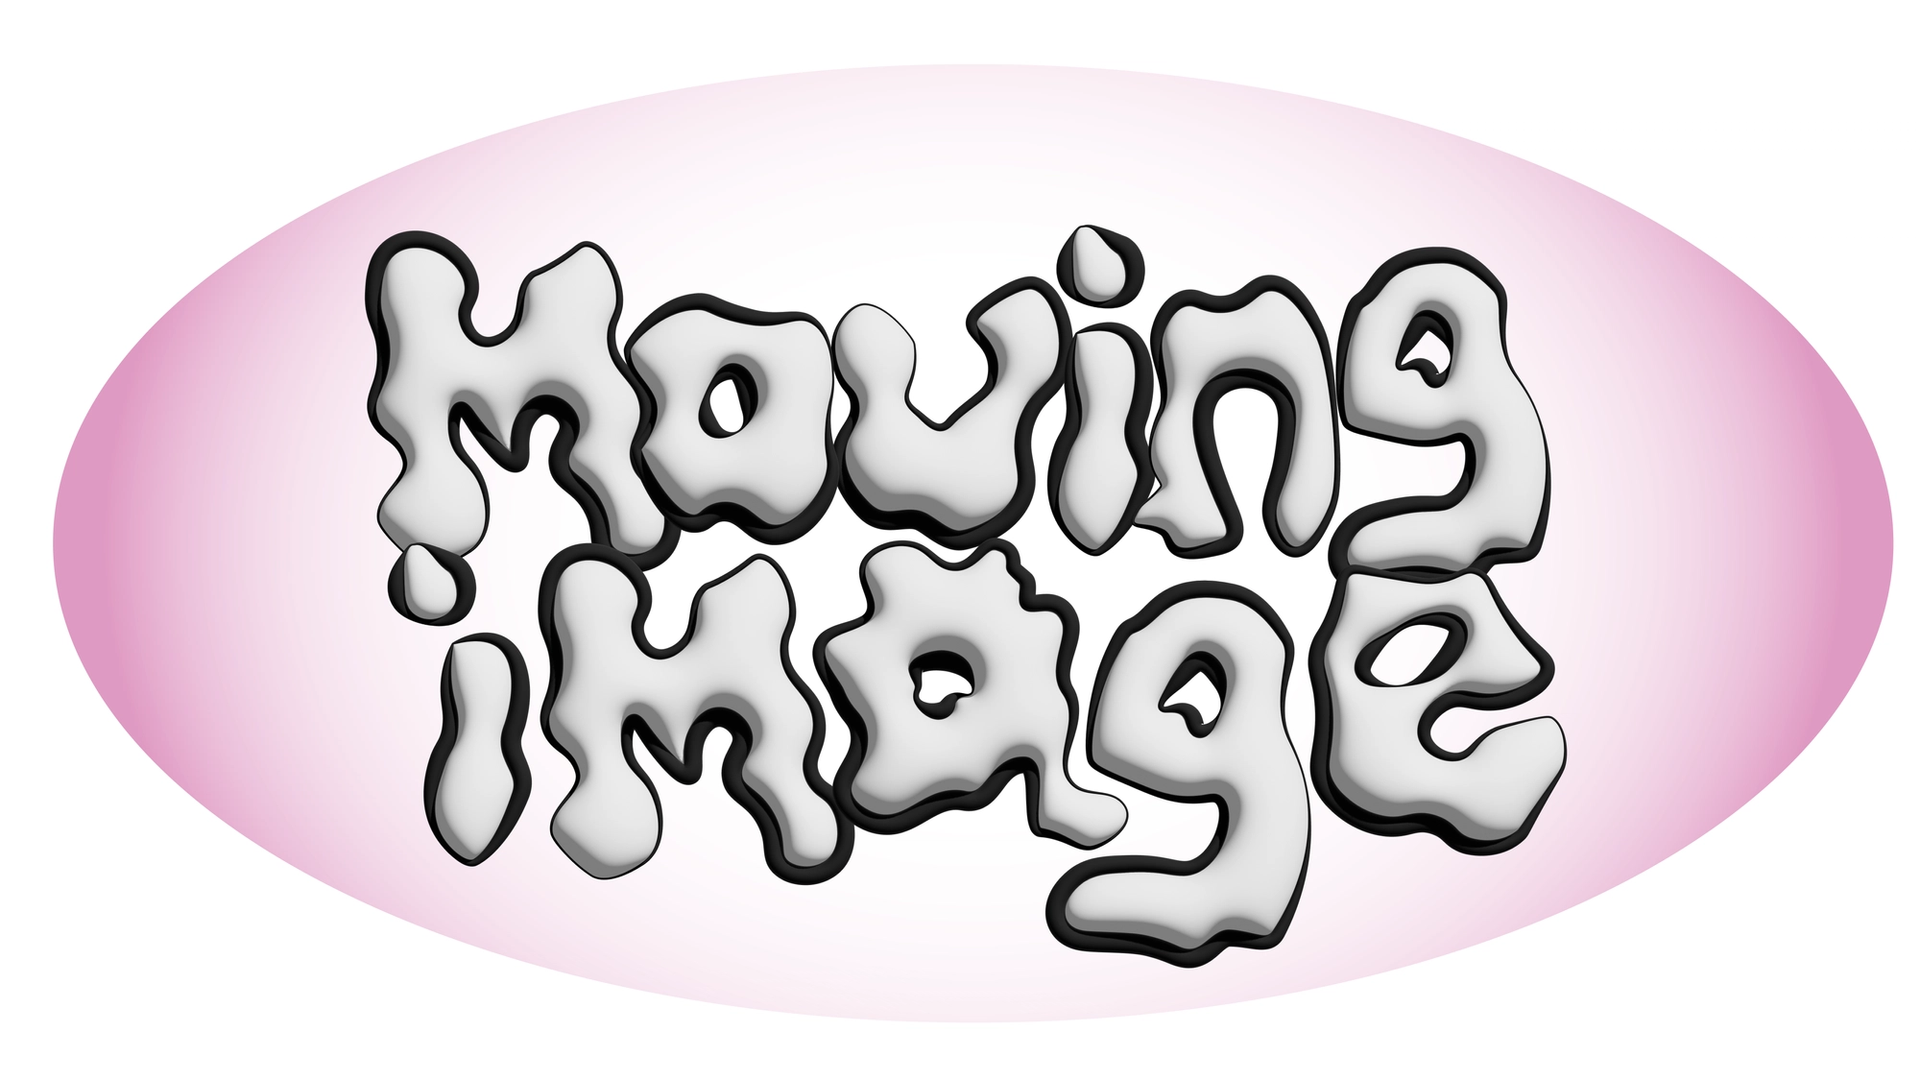 The words Moving Image in white with black outline, on an ombre pink oval background